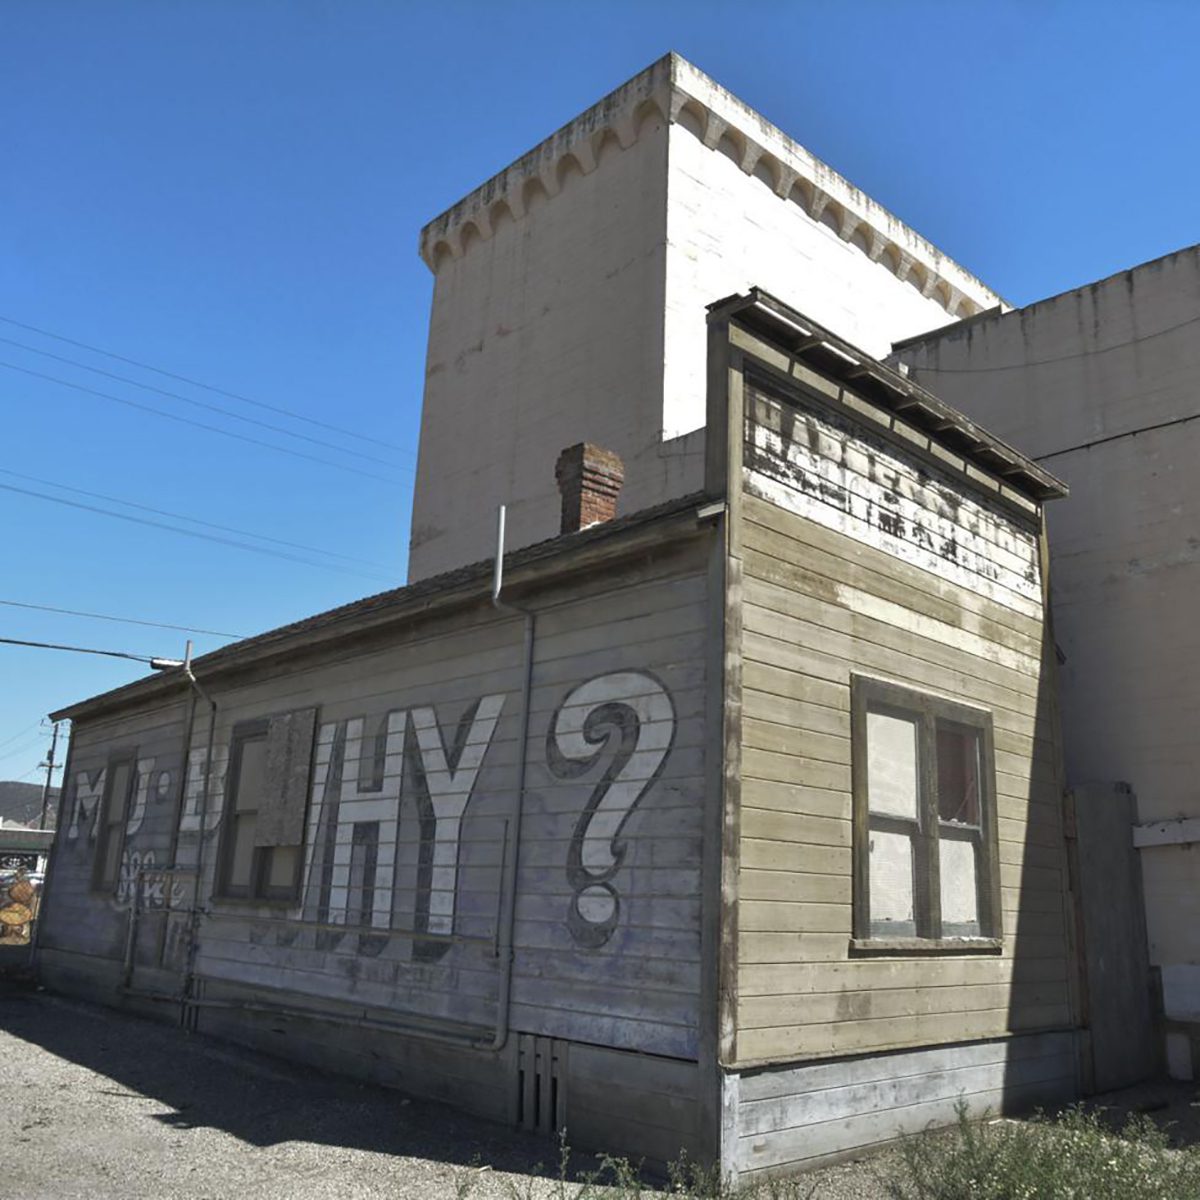 Lompoc Theatre Project also restoring ‘The Office’